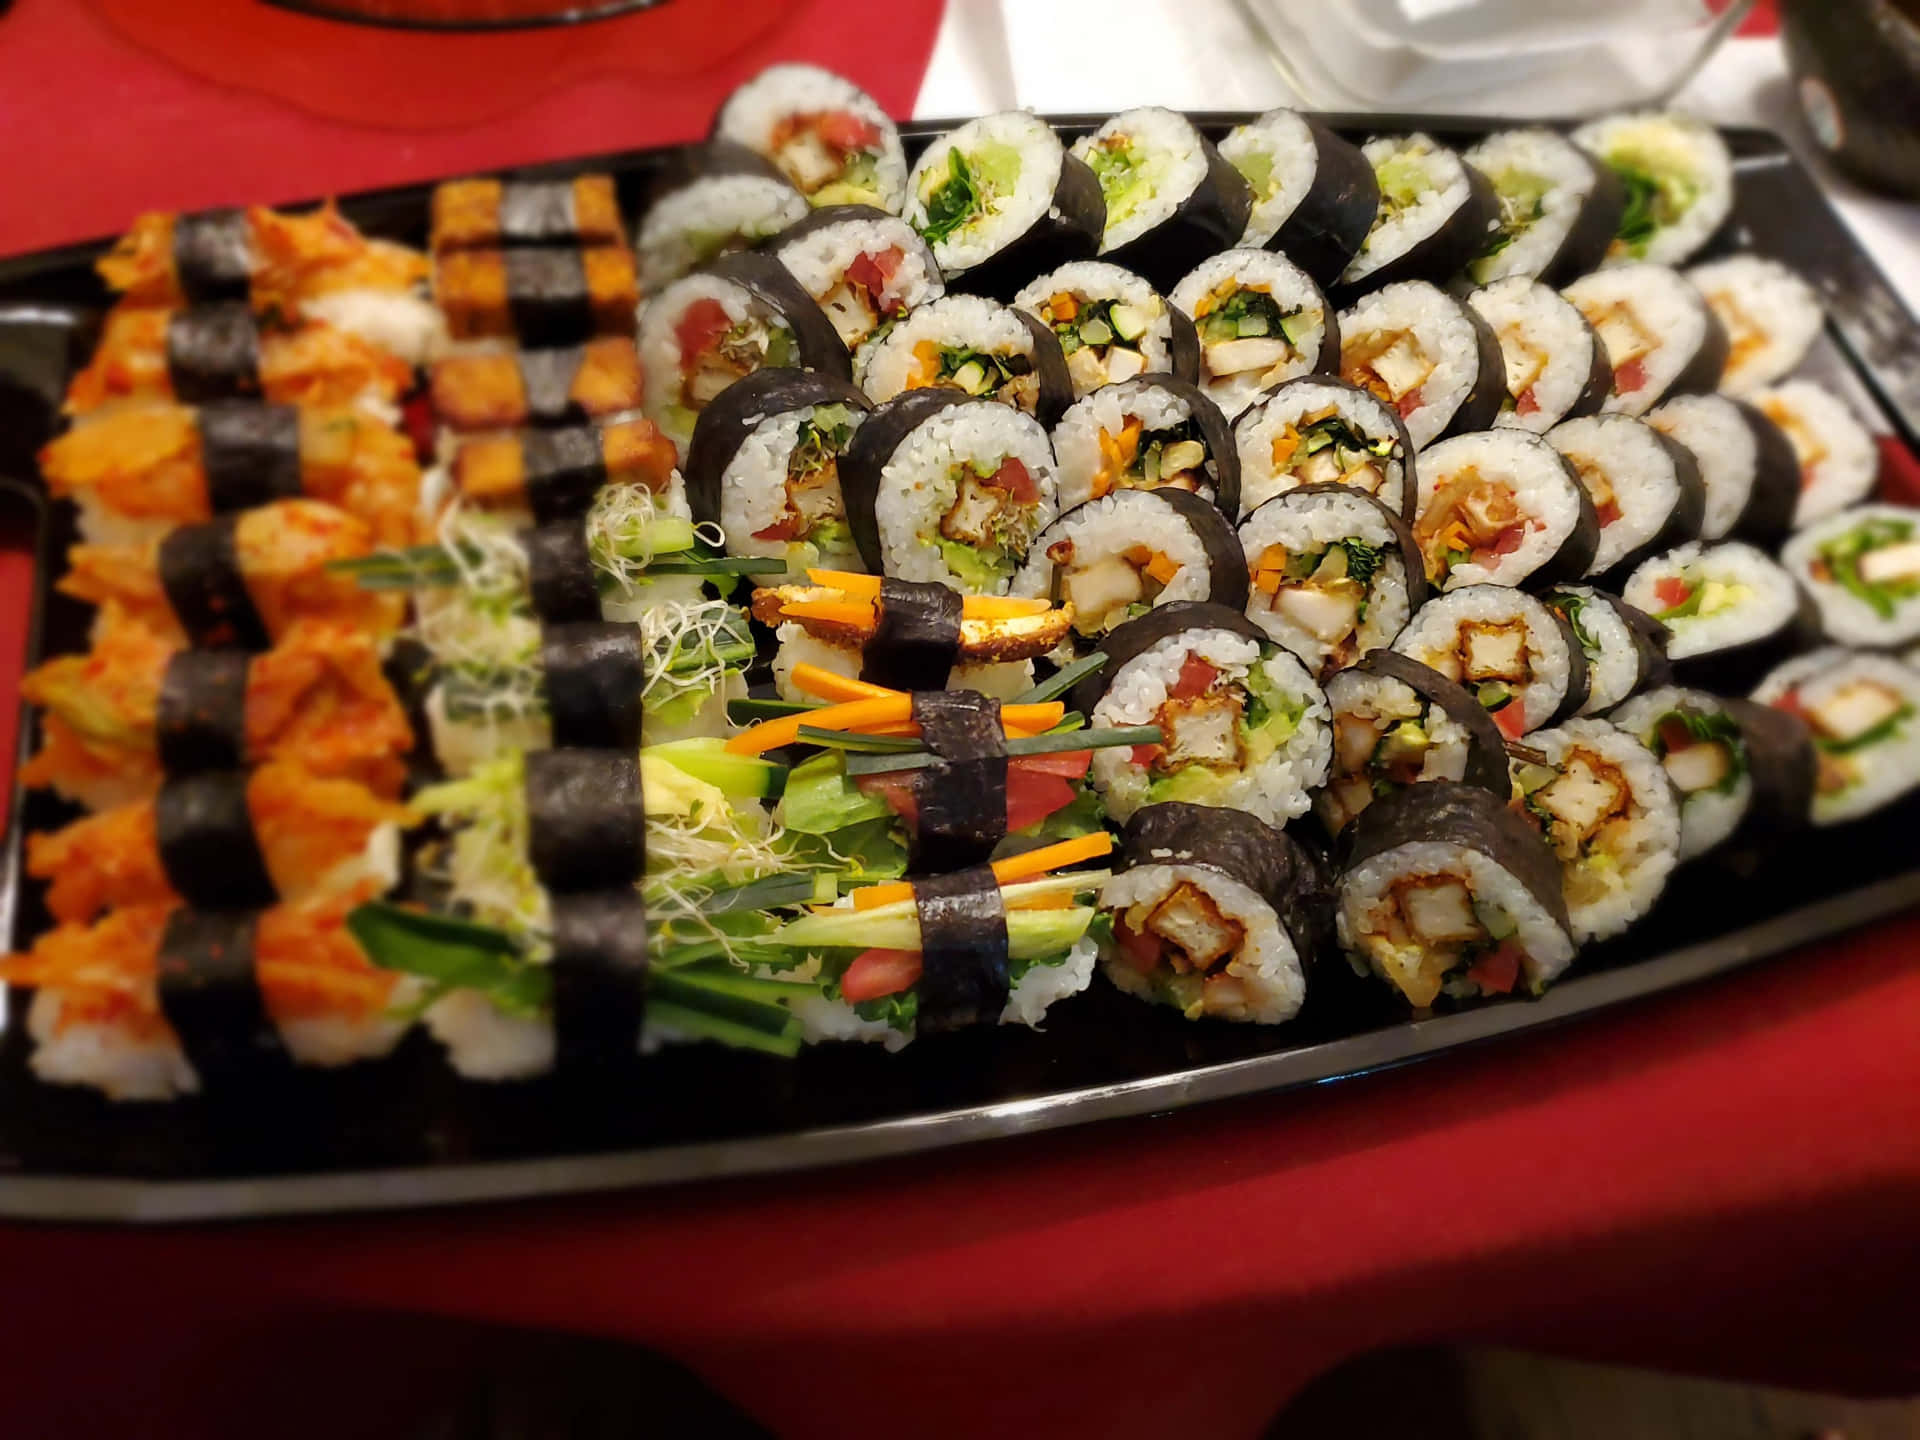 An assortment of different types of fresh sushi